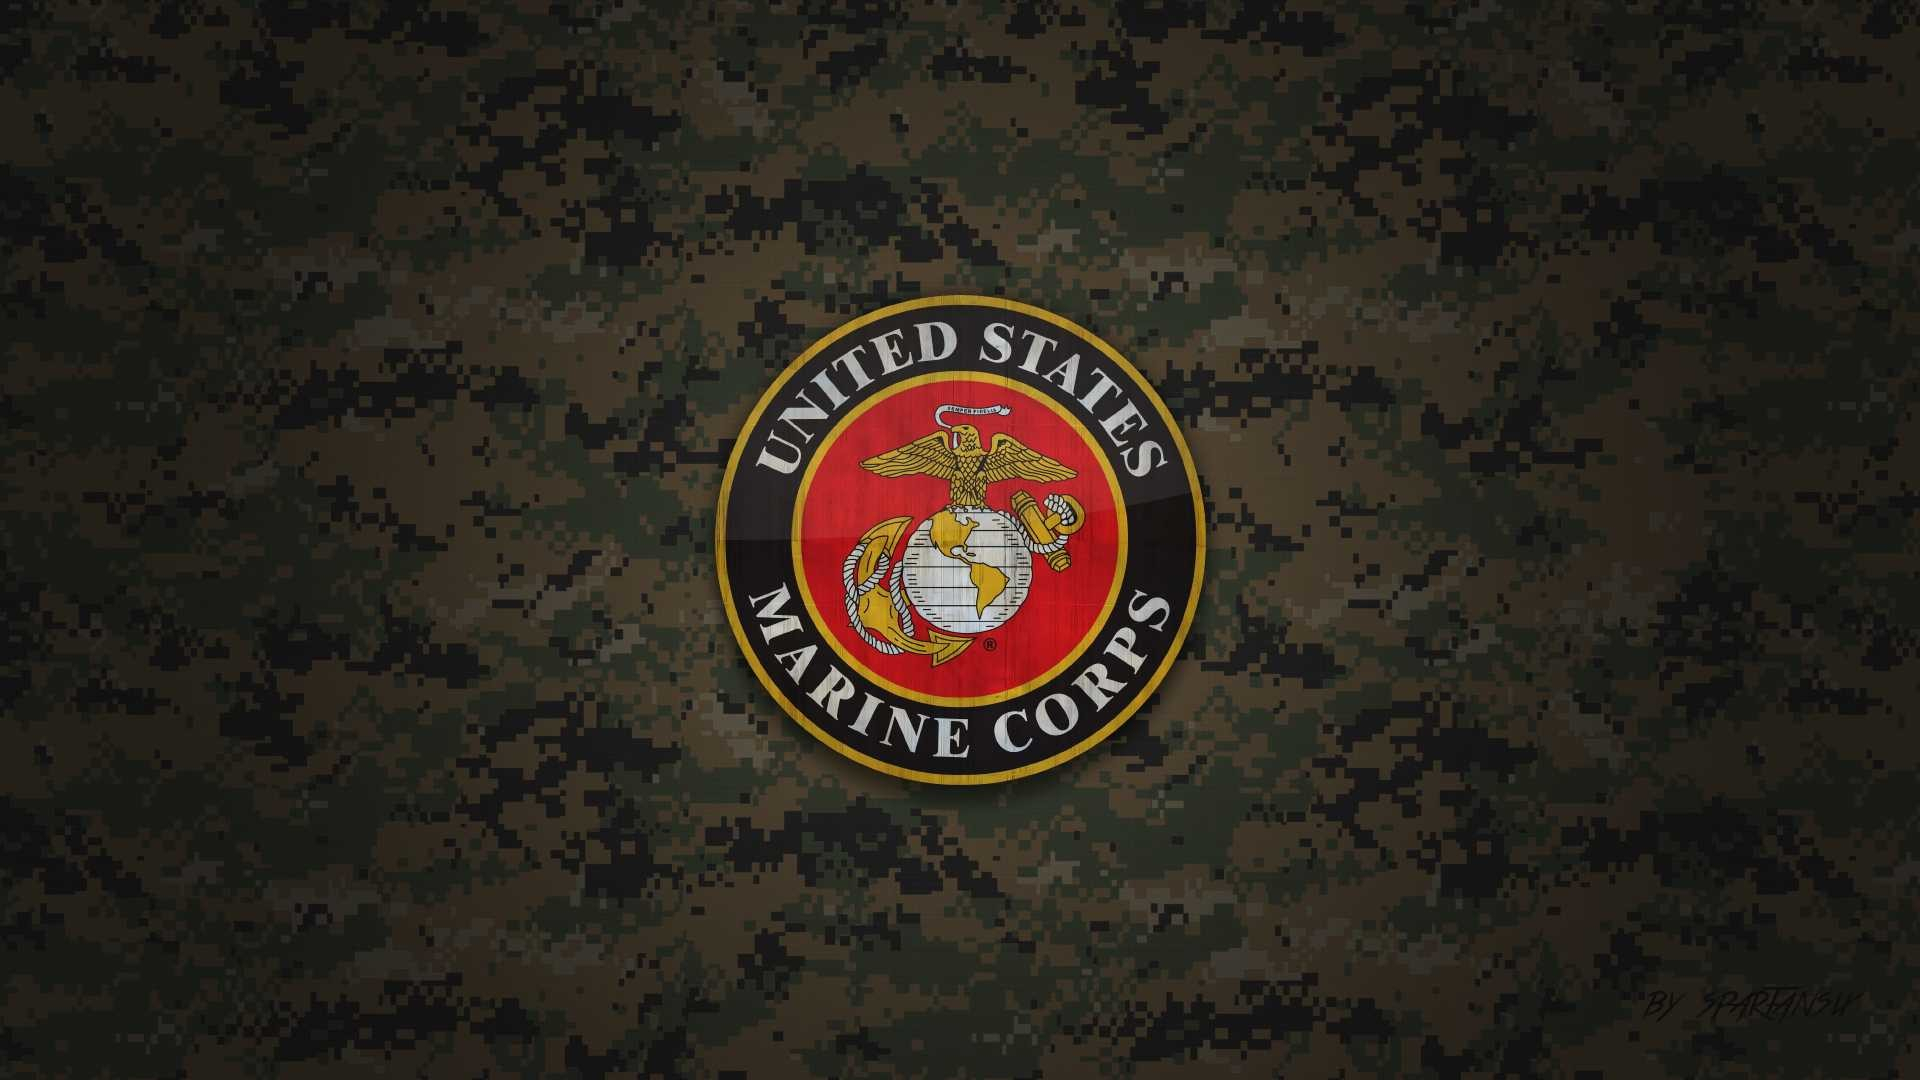 55+ marine corps wallpapers on wallpaperplay